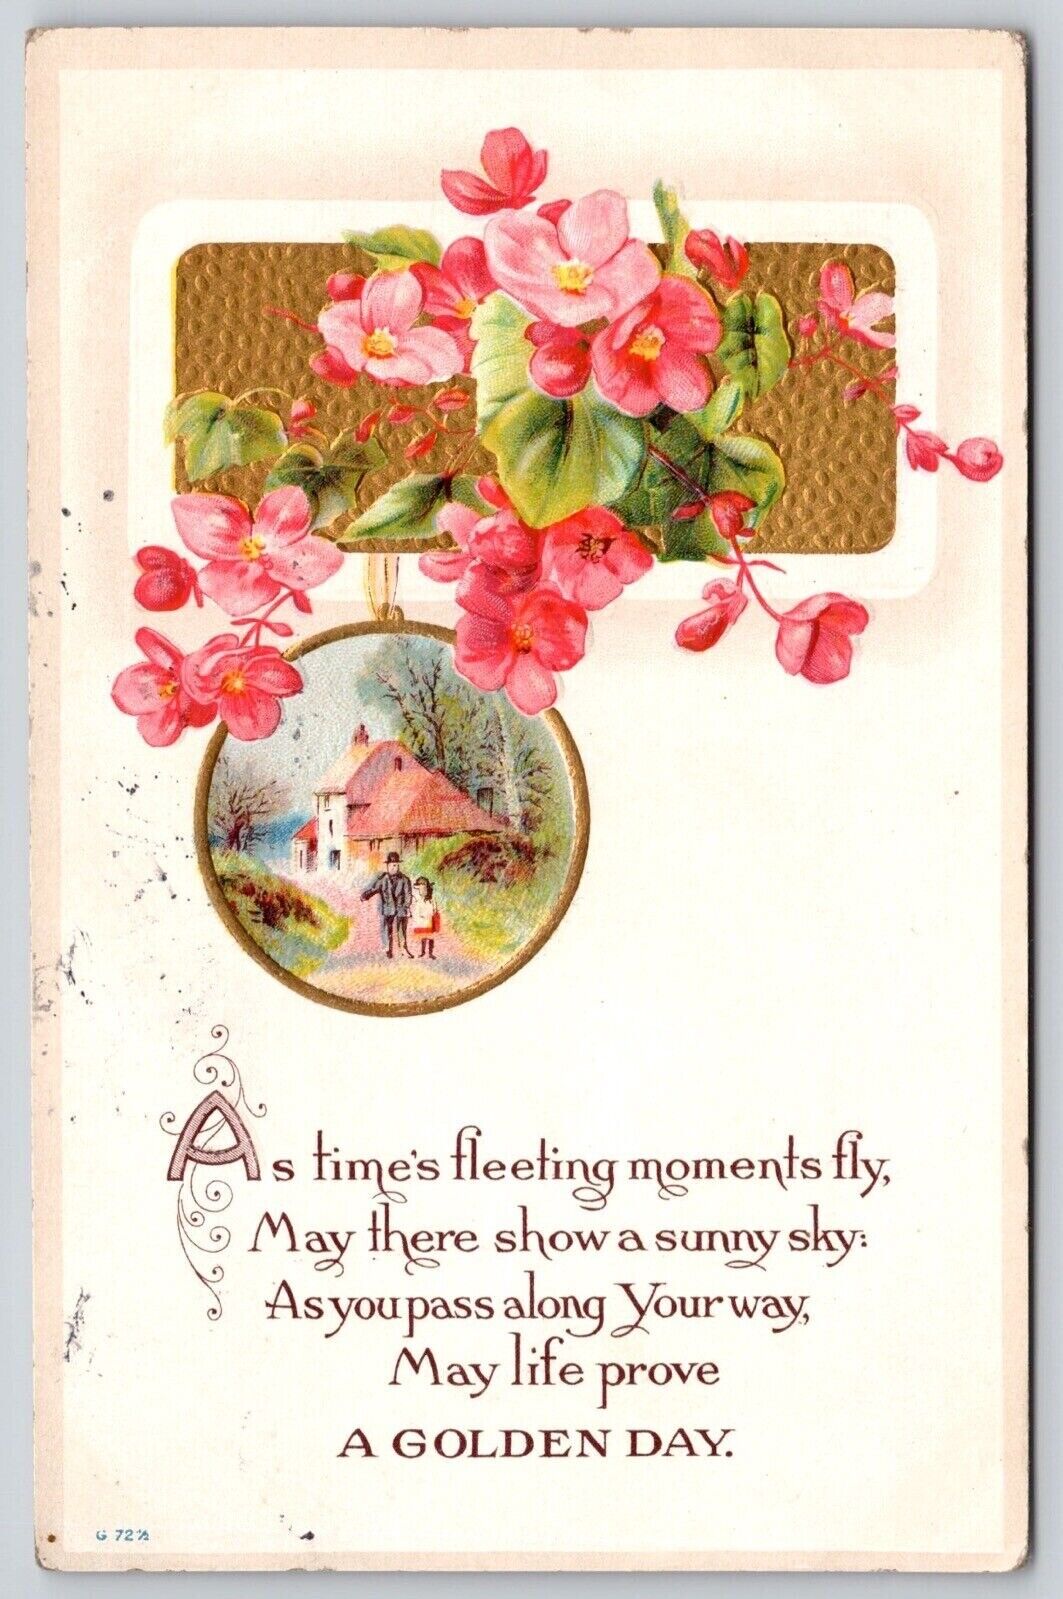 Golden Day Time Fleeting Antique Embellished Postcard PM Cancel WOB Note DB